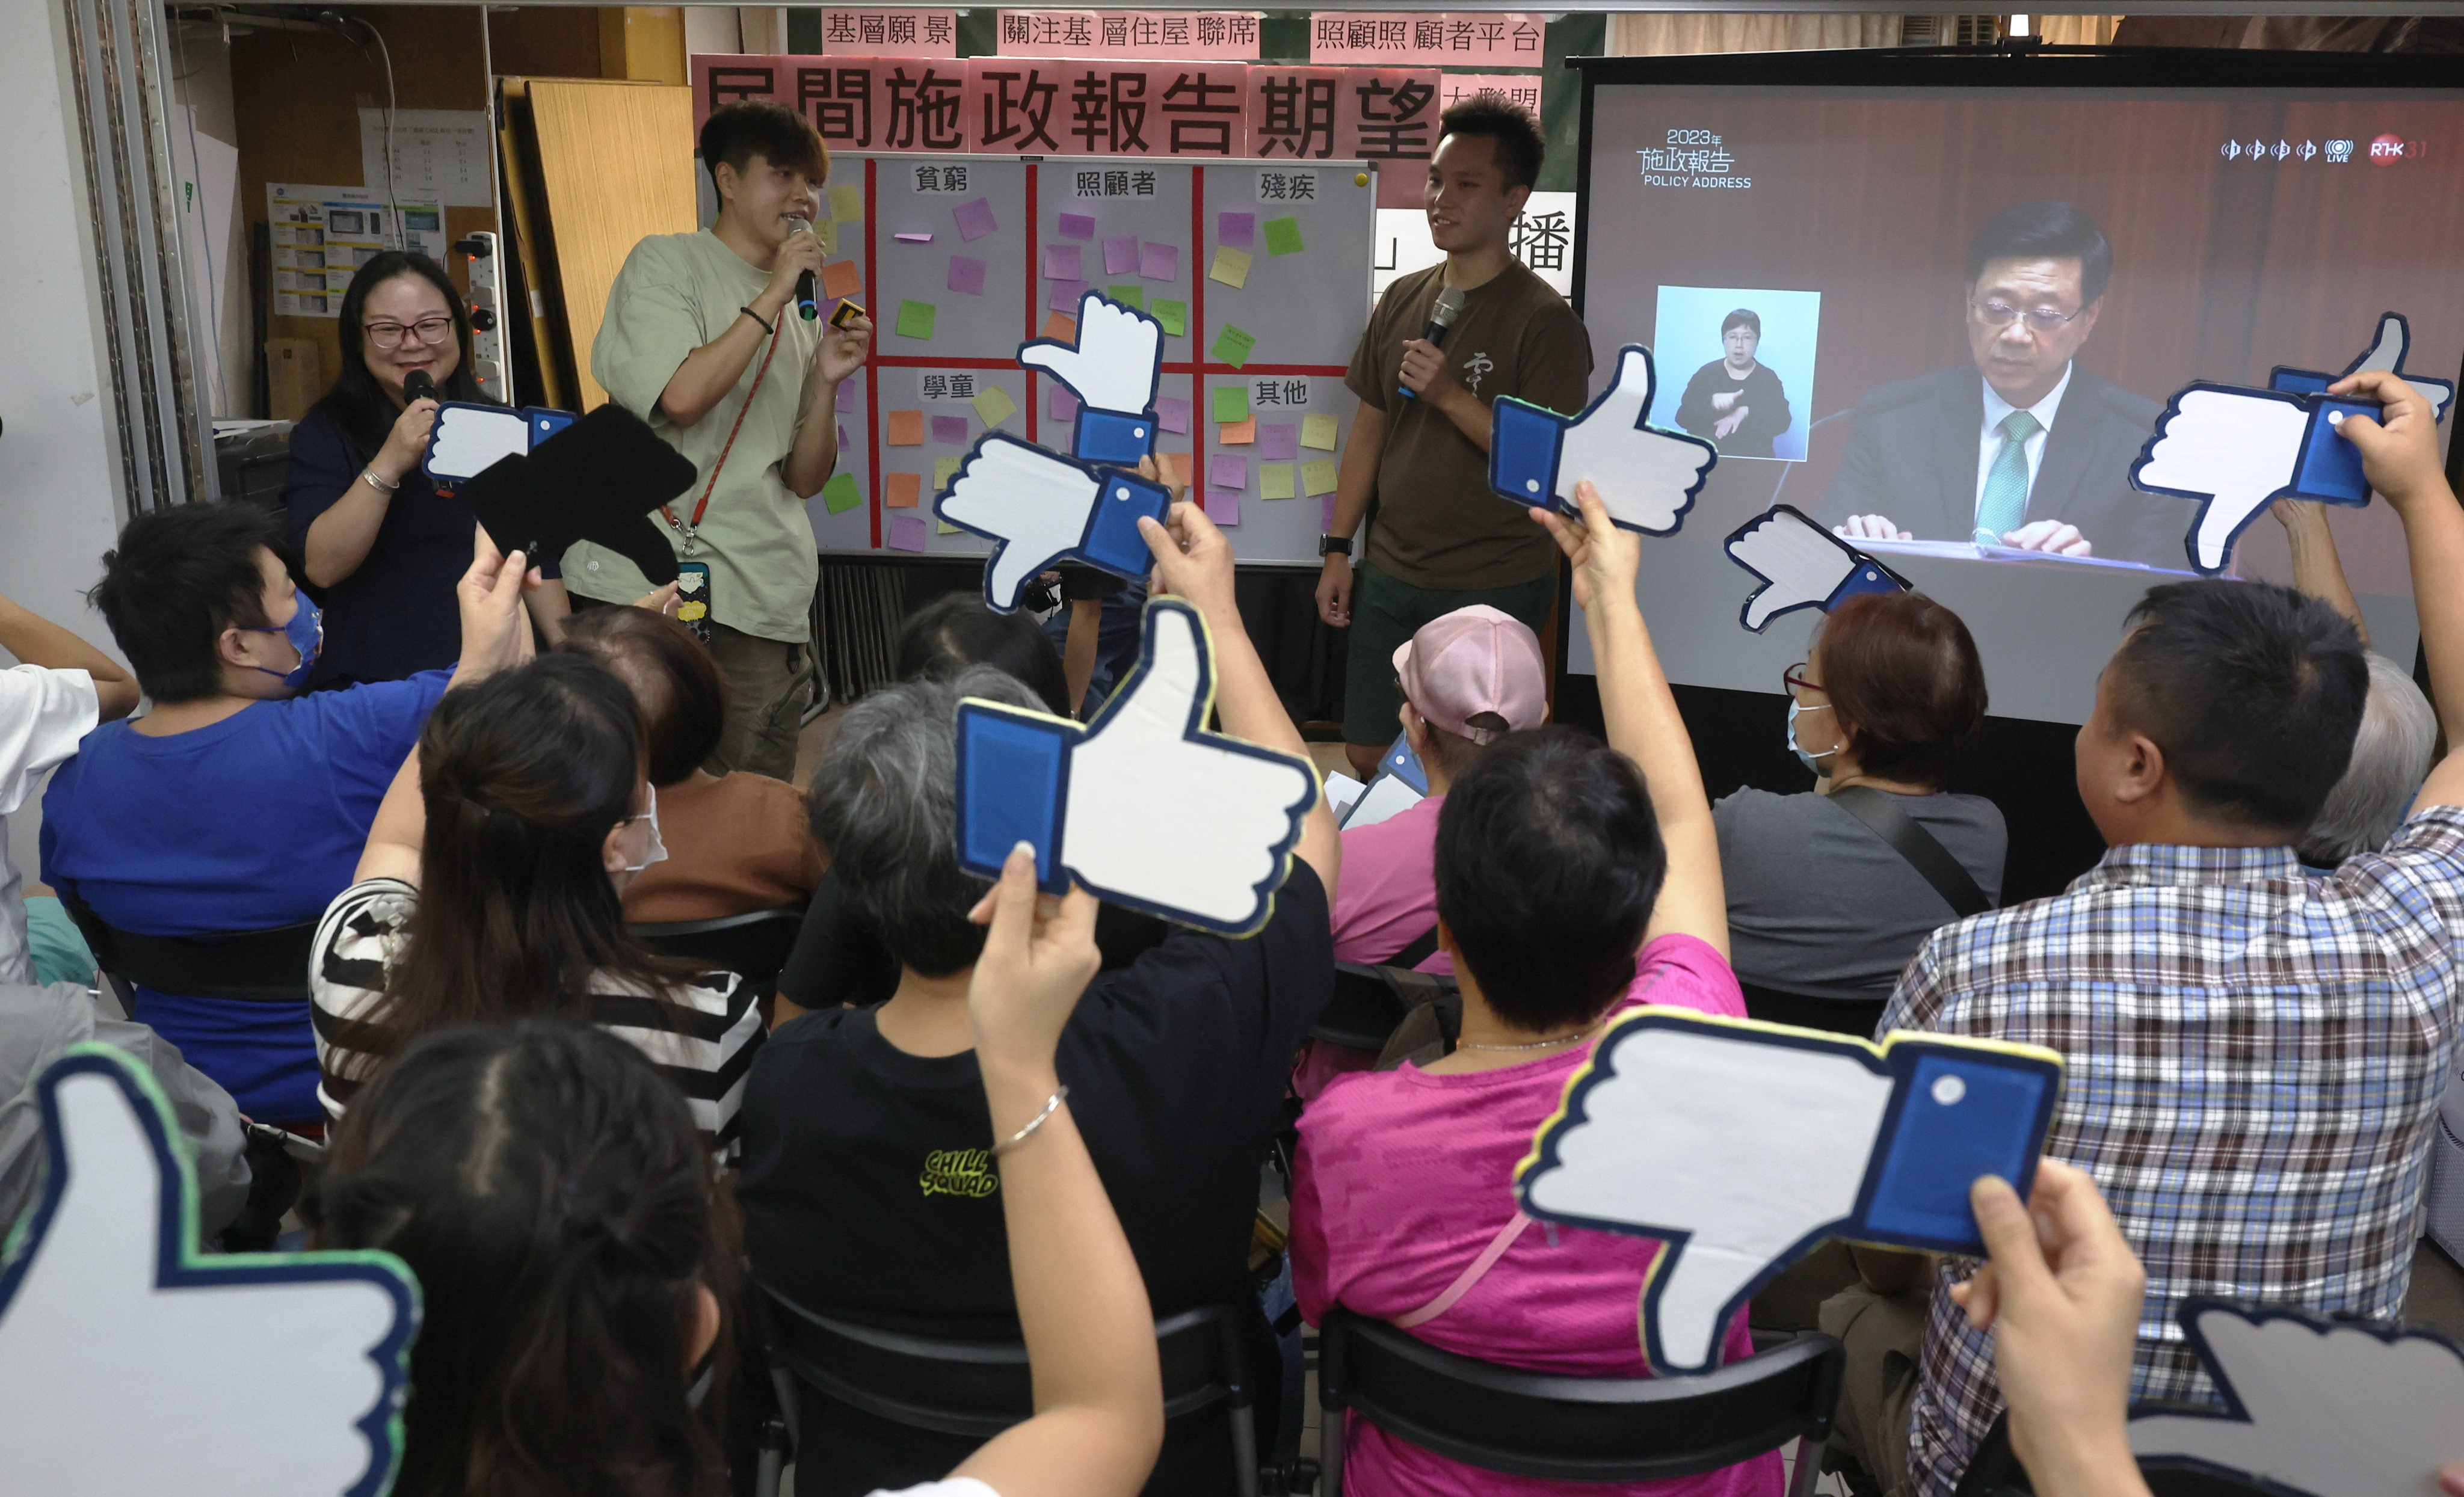 Residents react to the live broadcast of the chief executive’s policy address at a session organised by the Concern for Grassroots’ Livelihood Alliance, on October 25. Disagreements with the government on the right policy measures for Hong Kong should be accepted as part of a mature society. Photo: Edmond So